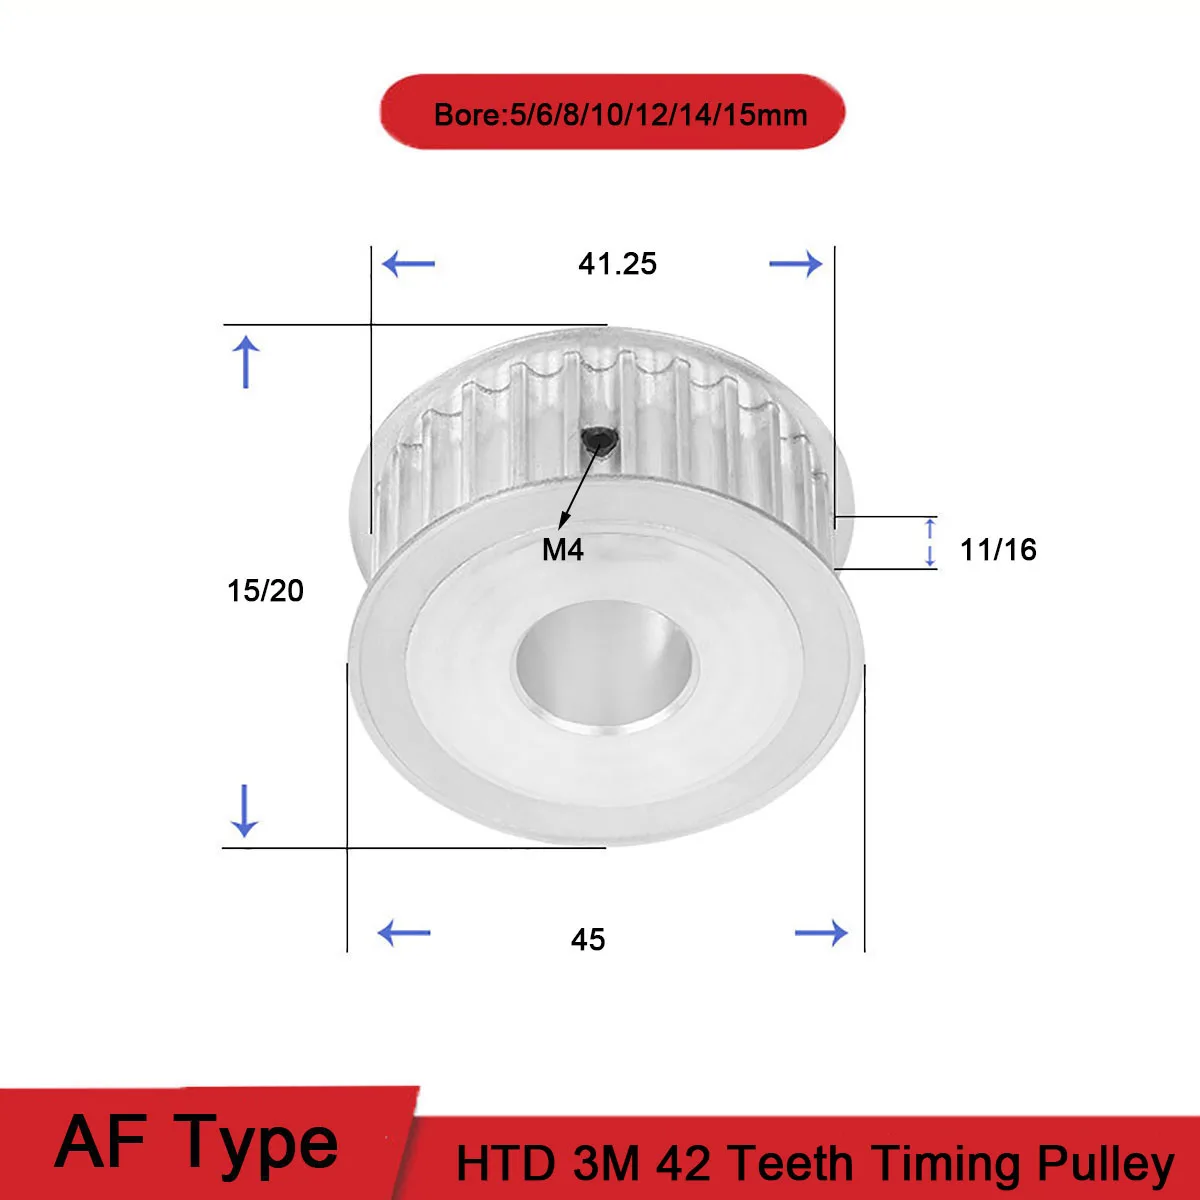 

HTD 3M 42 Teeth Timing Pulley Bore 5~15mm Gear Pulley 3mm Pitch Teeth Width 11mm 16mm Aluminum Synchronous Timing Belt Pulley